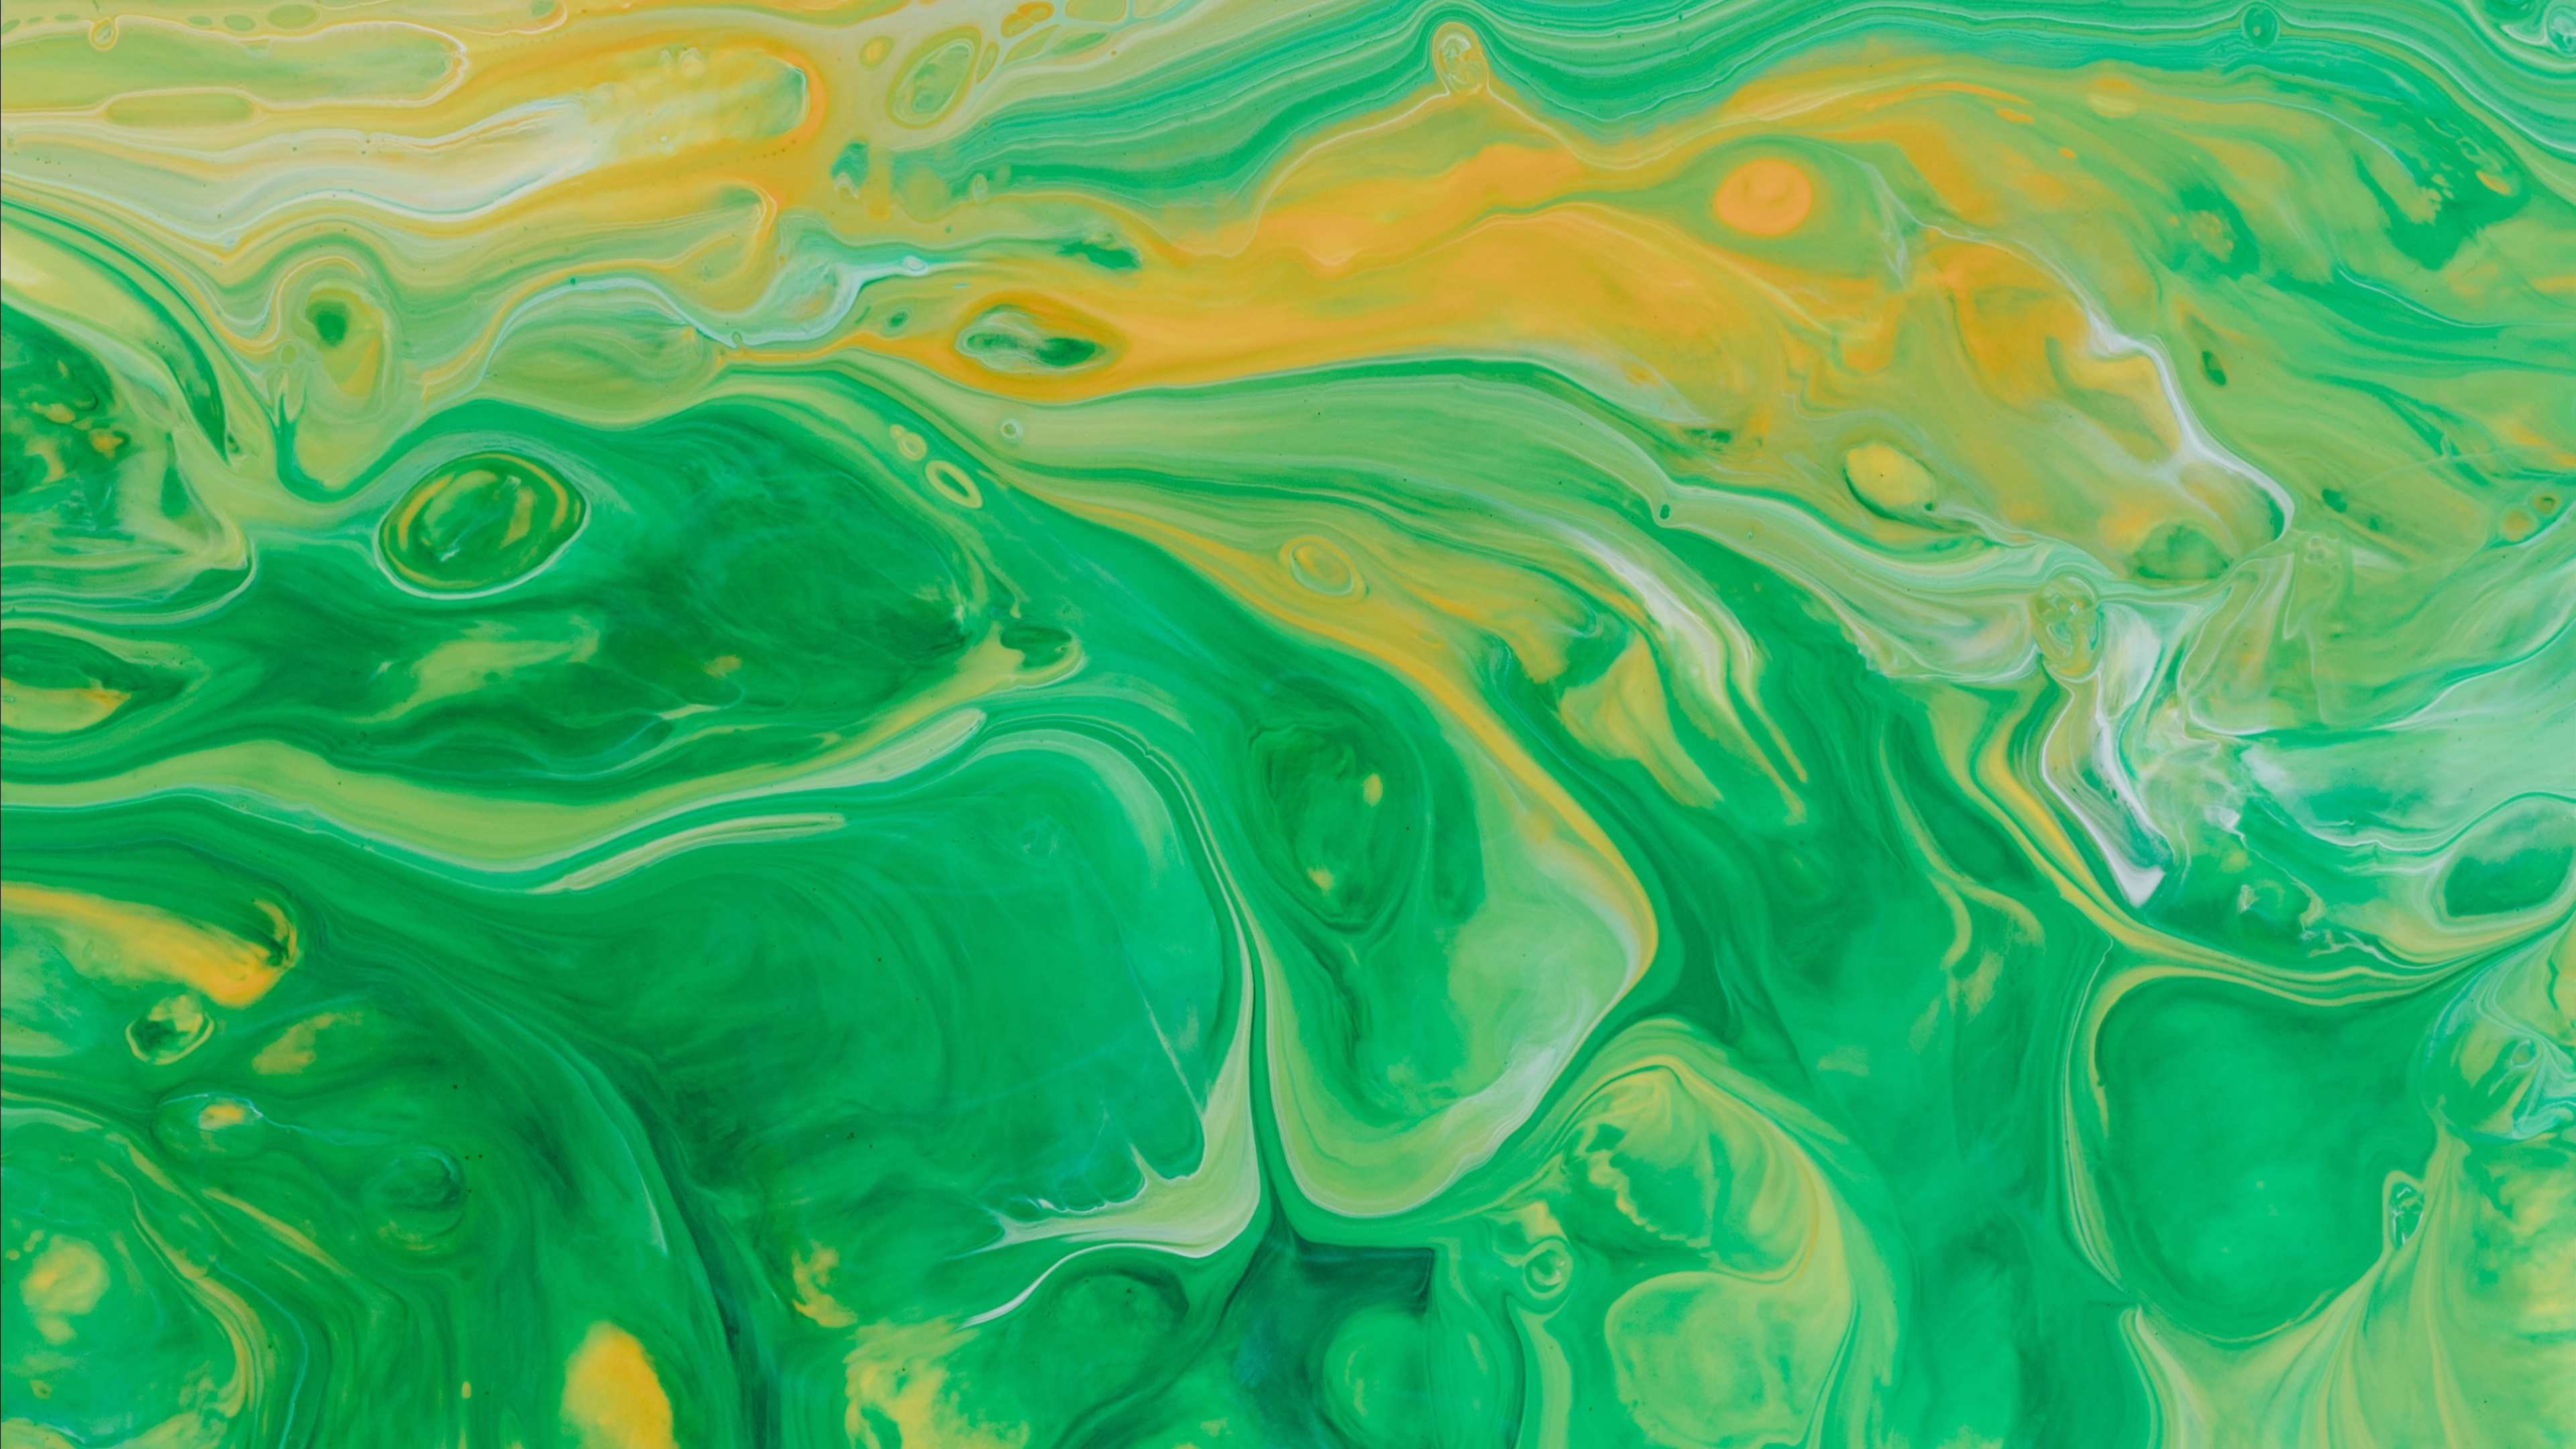 Green and Yellow Abstract Painting. Wallpaper in 3840x2160 Resolution